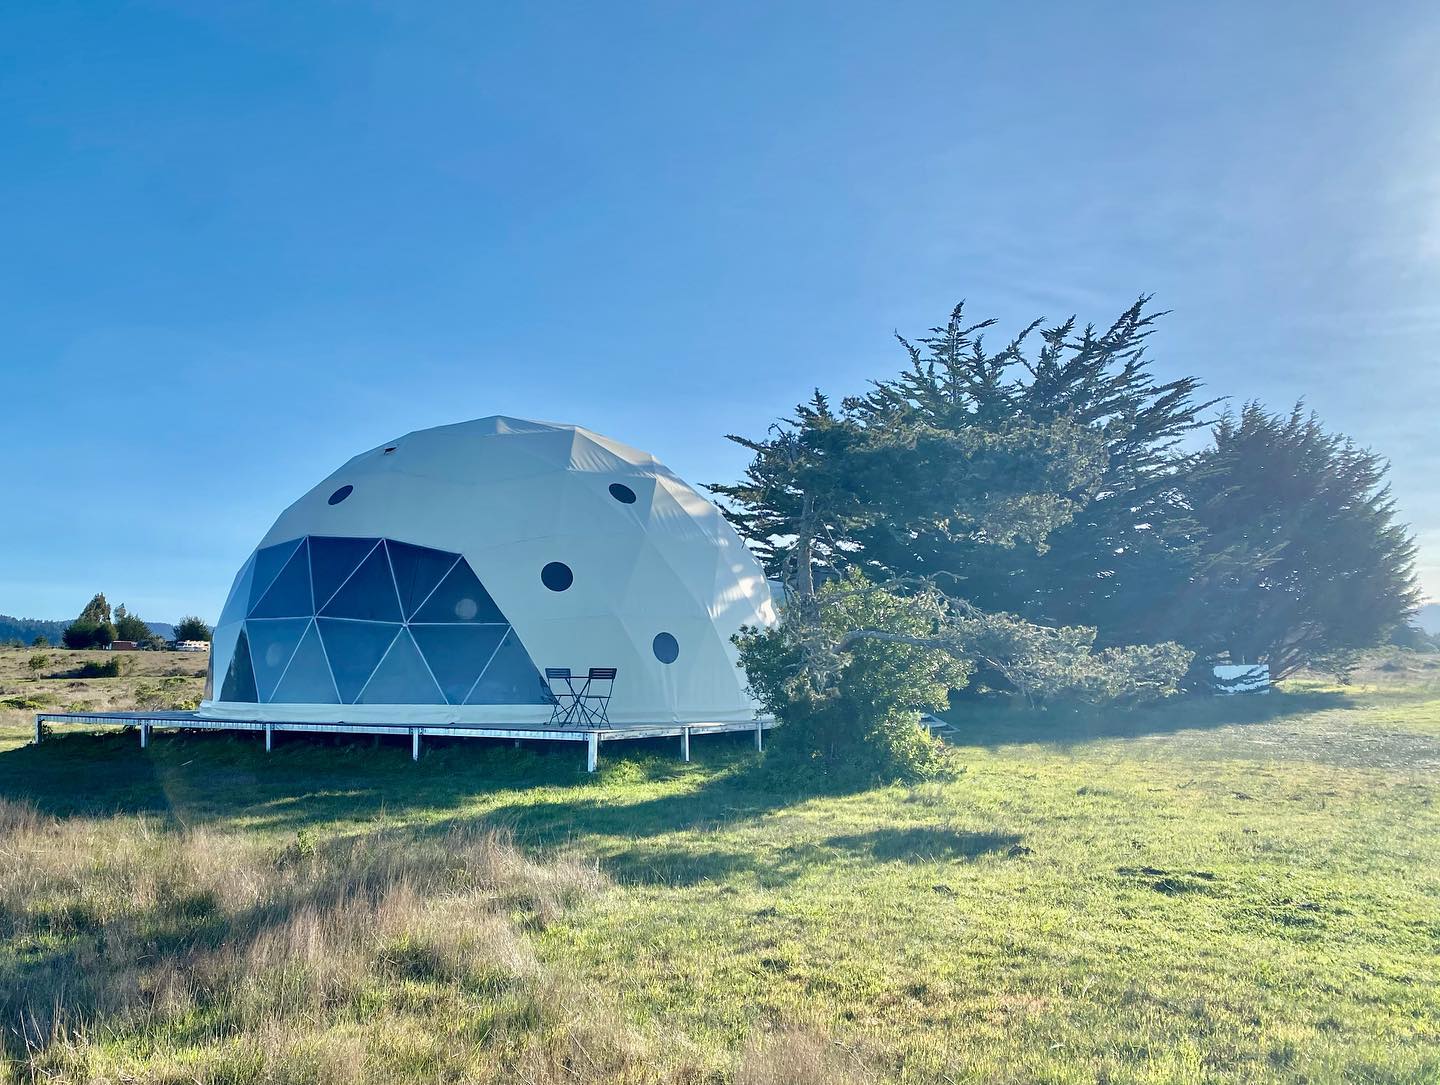 I Stayed in a Geodesic Tiny House During New Zealand's Winter